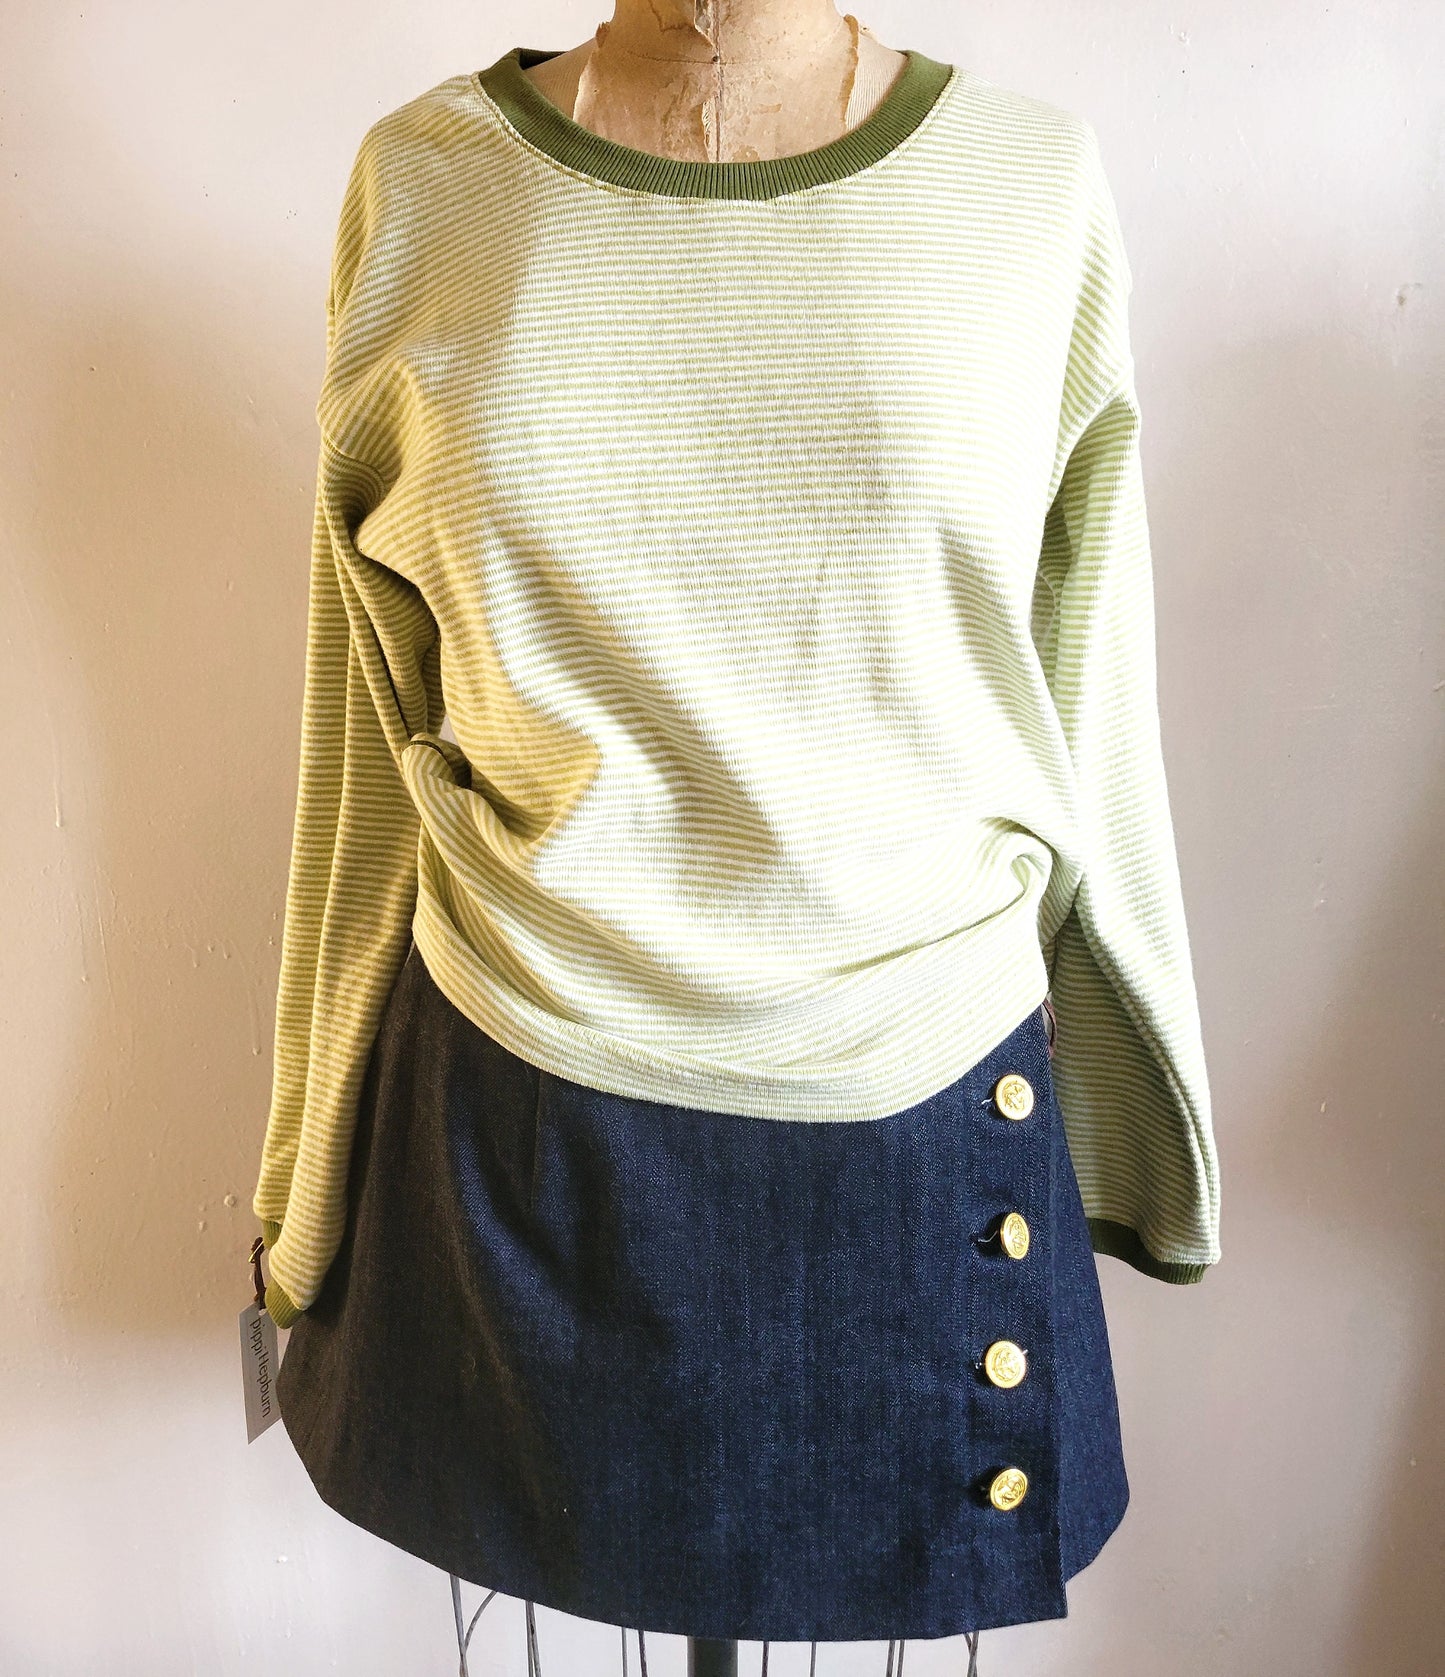 Womens Knit Tops, Womens Striped Top, Green & White Striped Top, Relaxed Fit Long Sleeve Tee